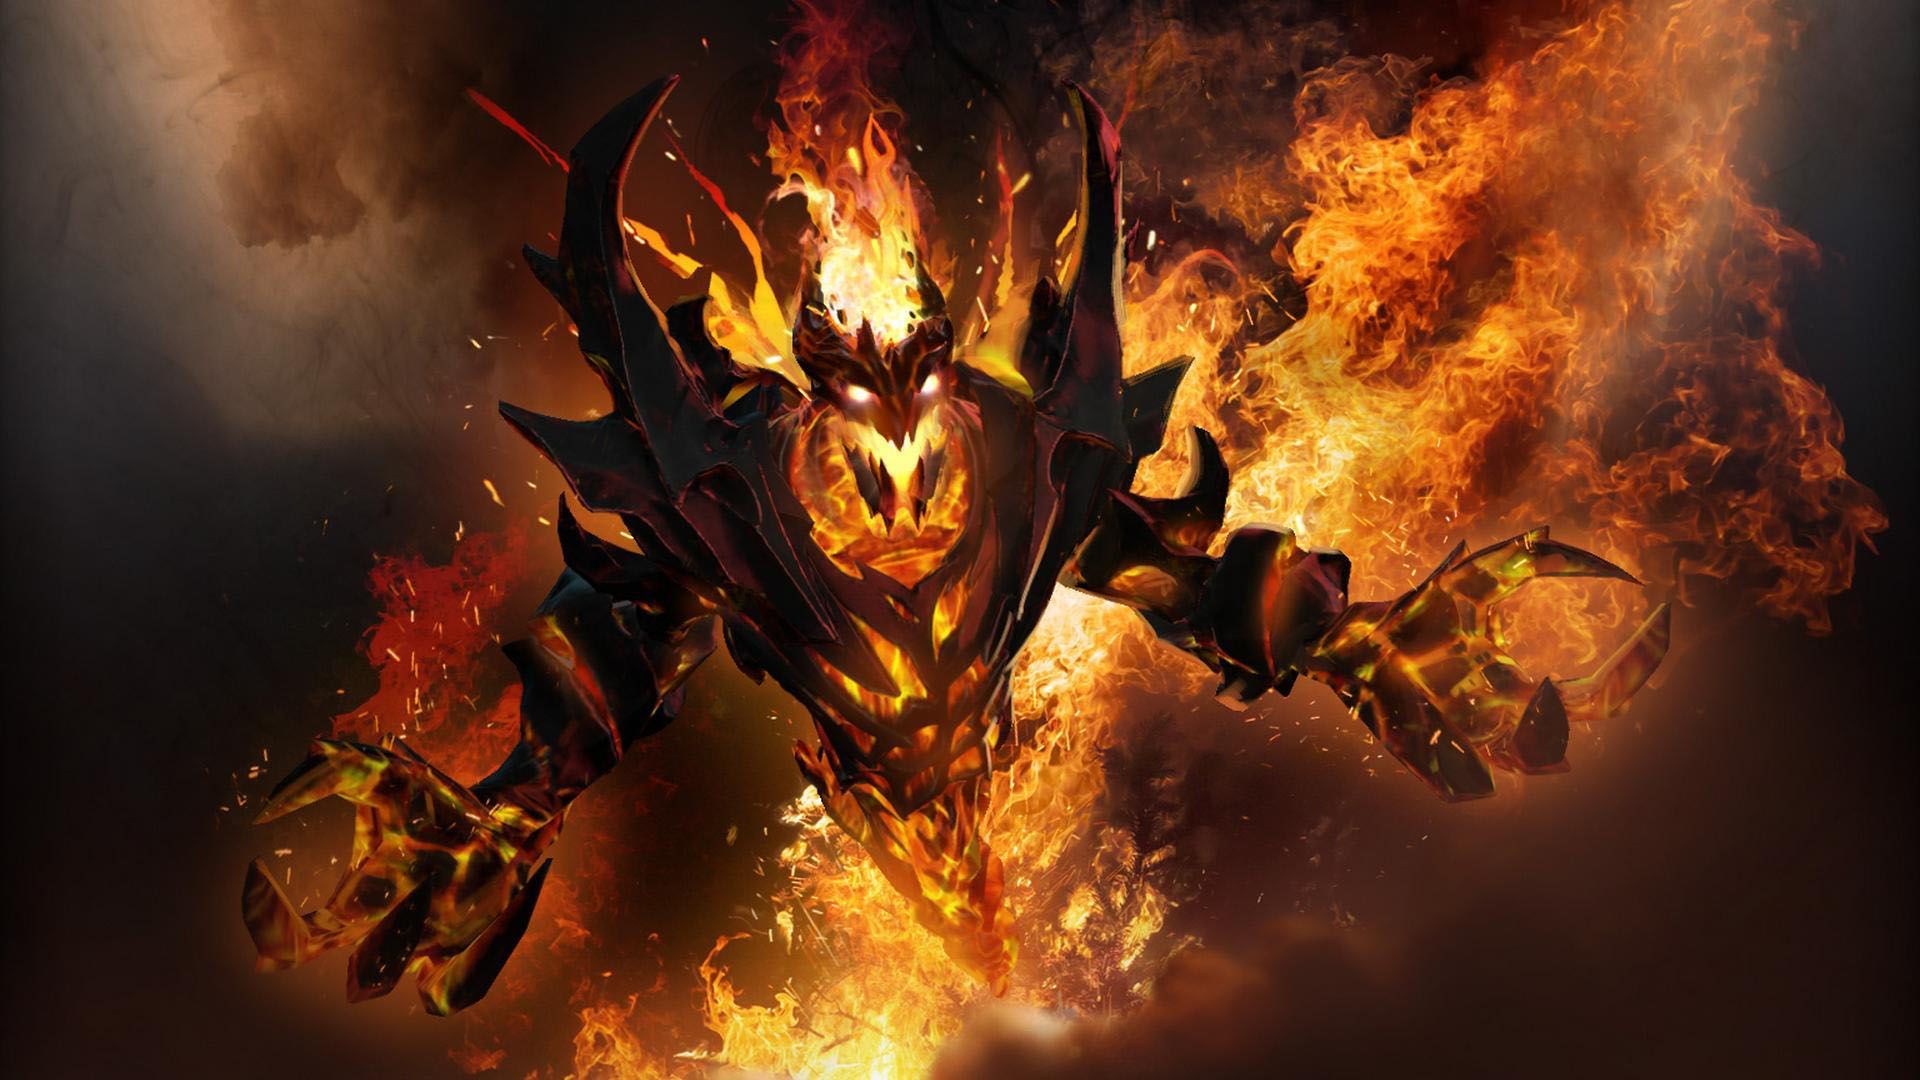 Dota 2 Shadow Fiend #250637 | Full HD Widescreen wallpapers for ...